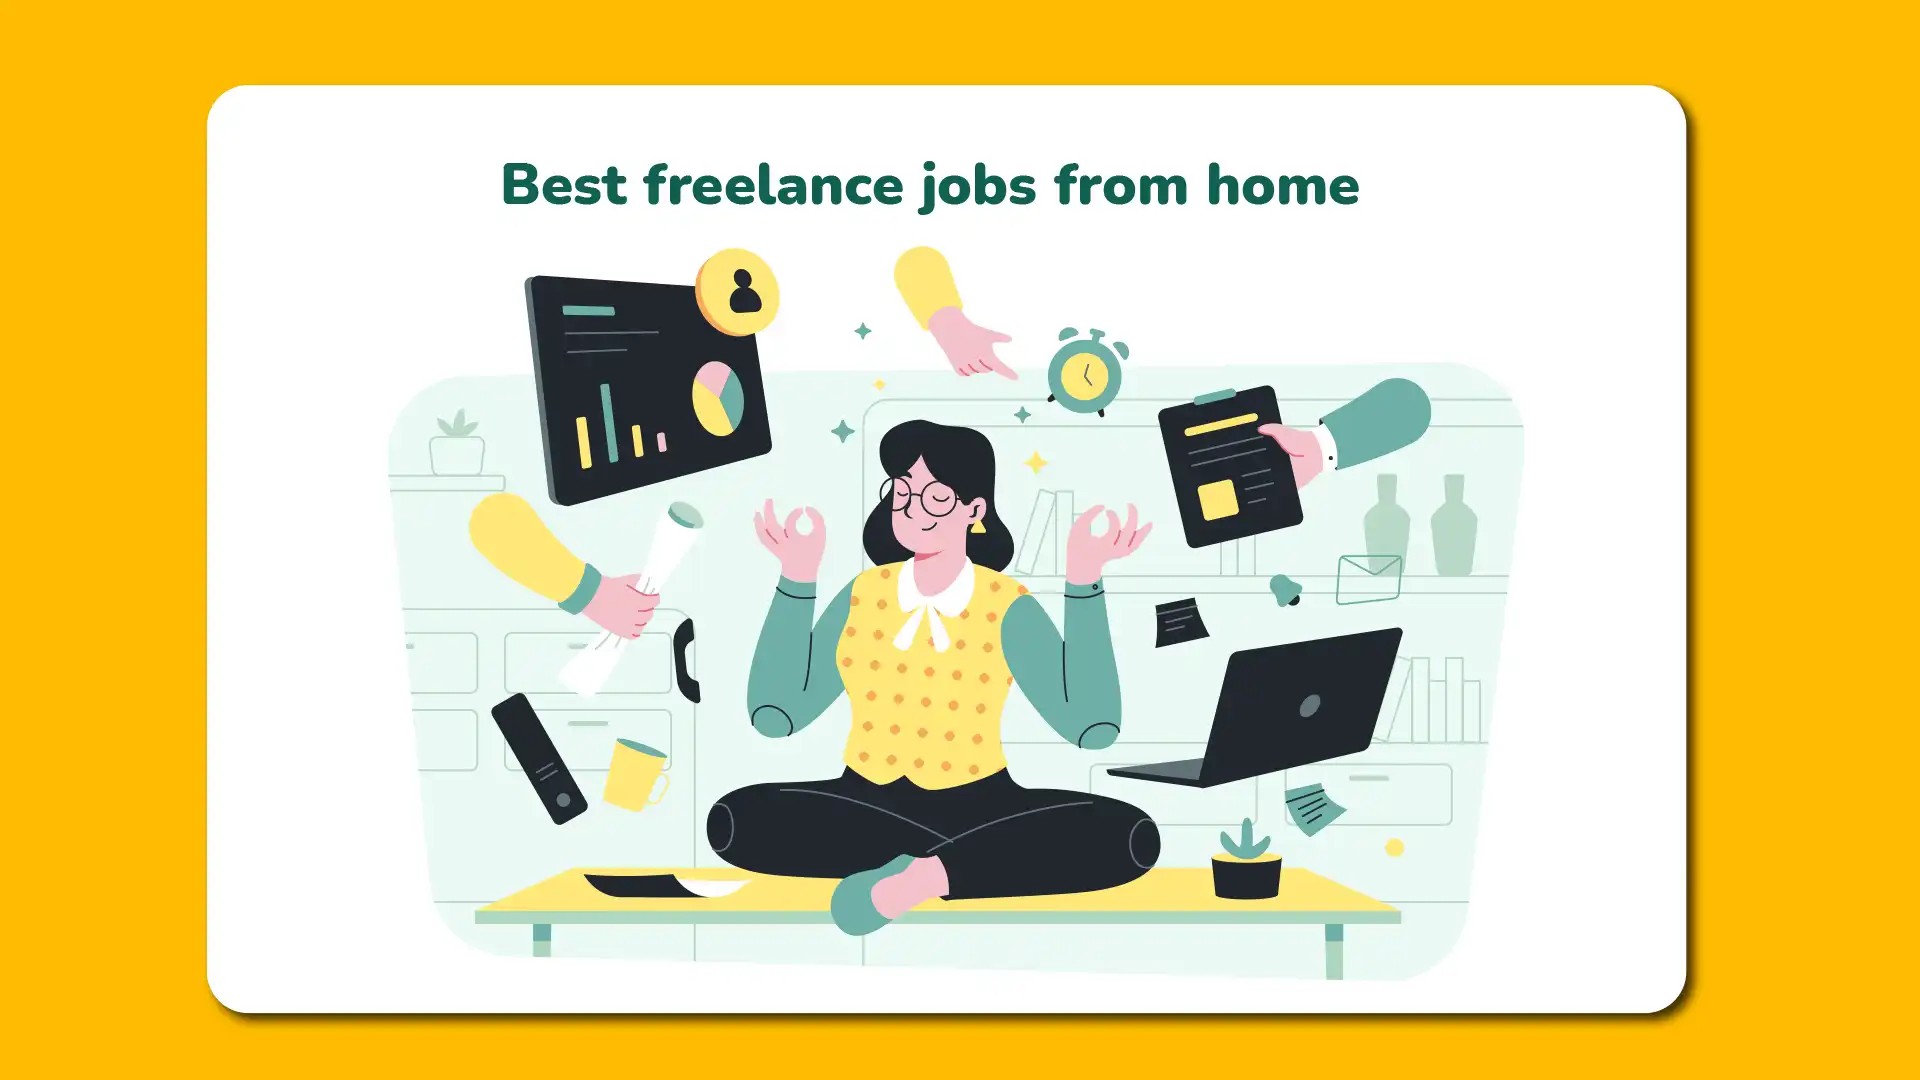 Best freelance jobs from home